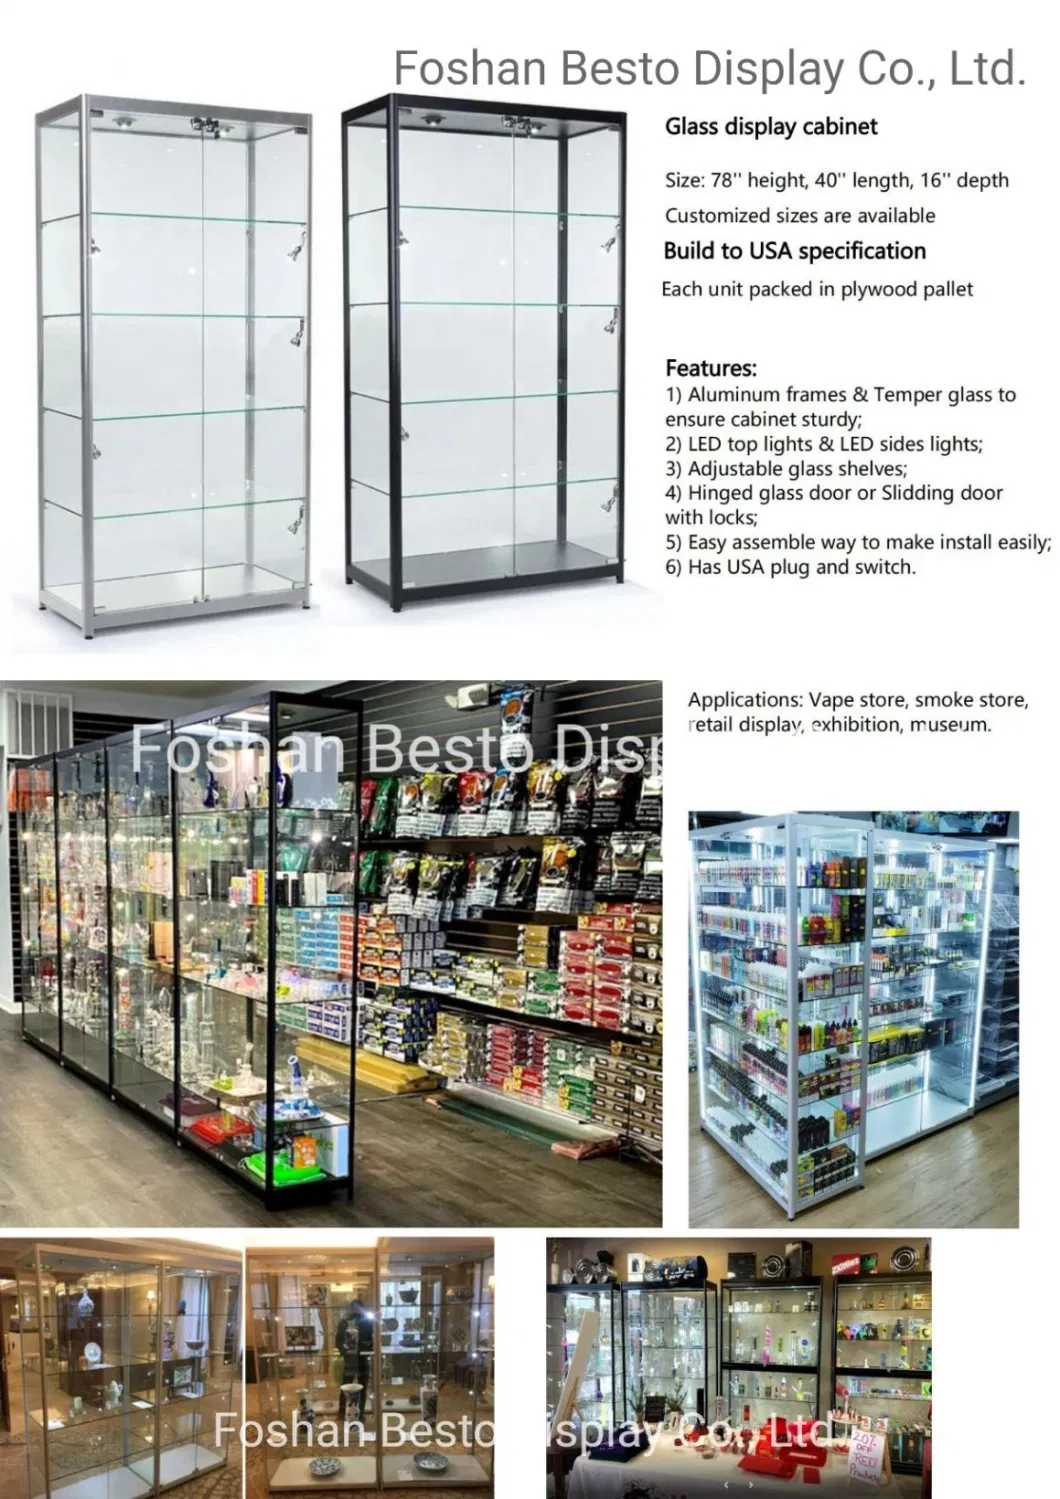 78 Inch Glass Display Cabinets with LED Lights and Glass Shelves for Vape Store, Smoke Shop, Jewelry Store, Tabacco, Cigeratte Store, Retail Display.